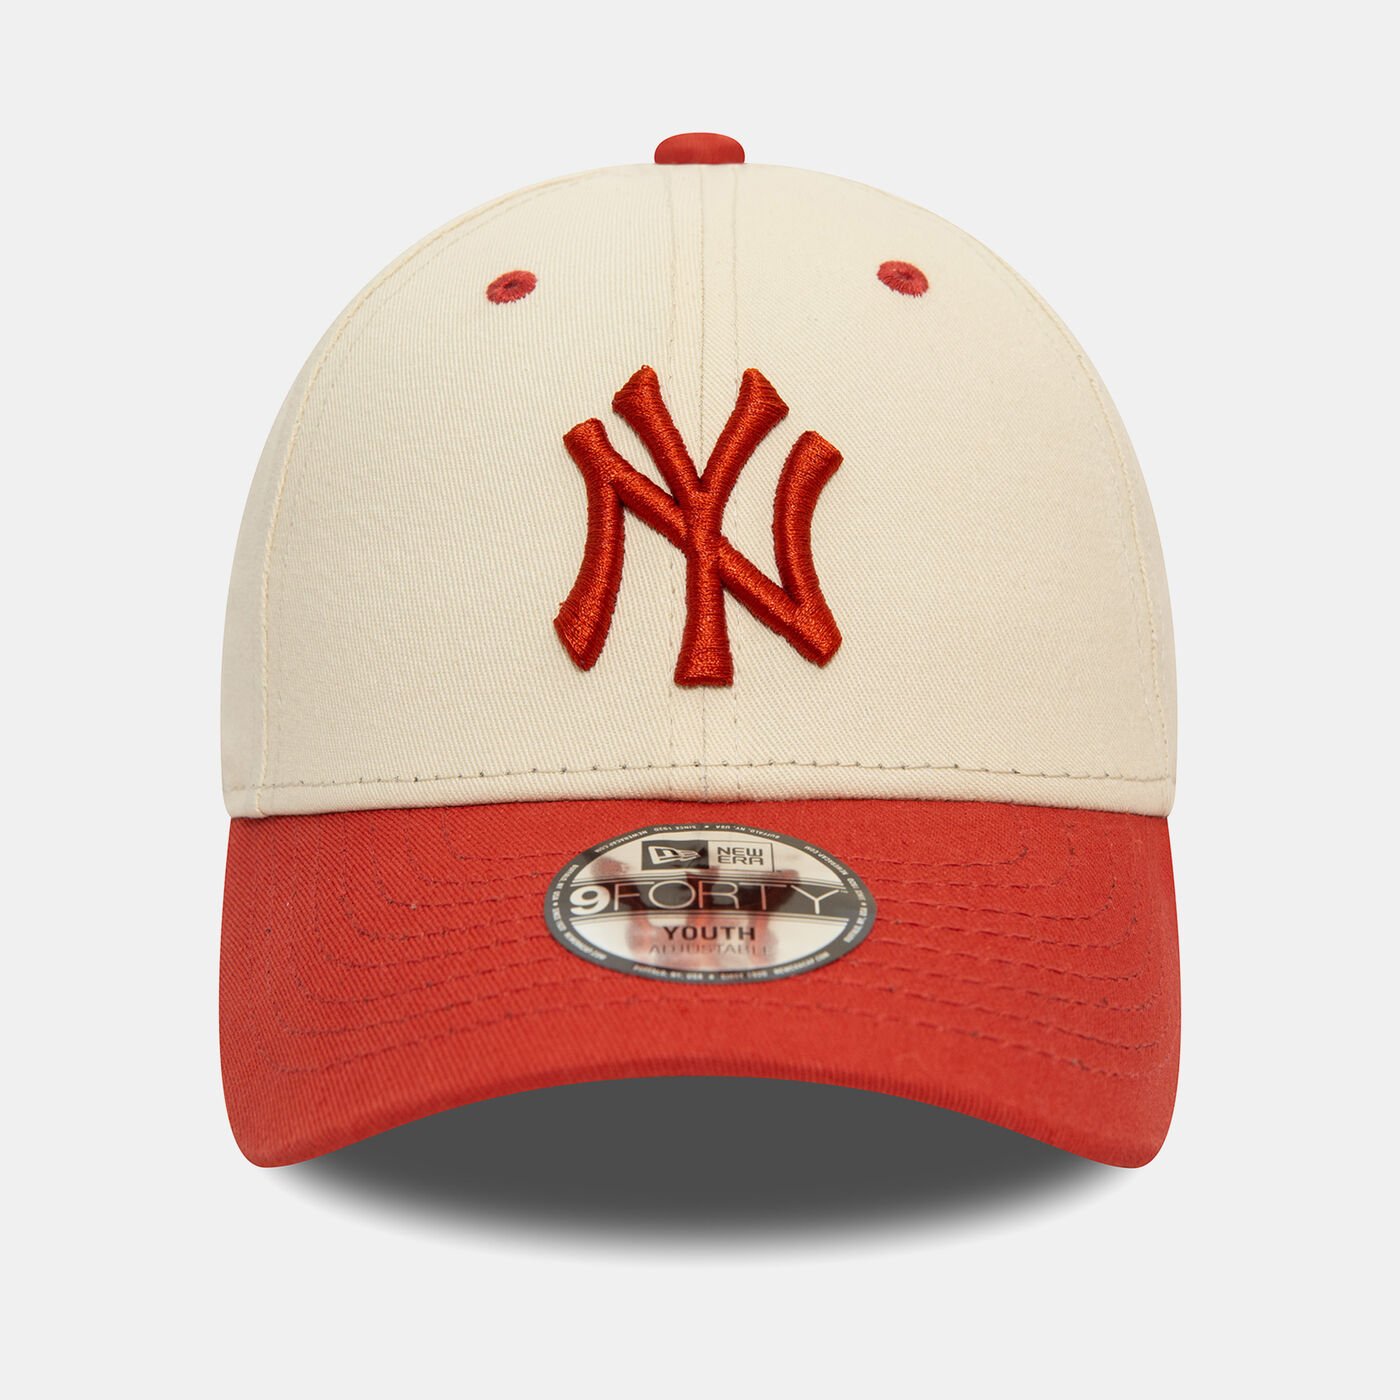 Kids' MBL New York Yankees Contrast 9FORTY Cap